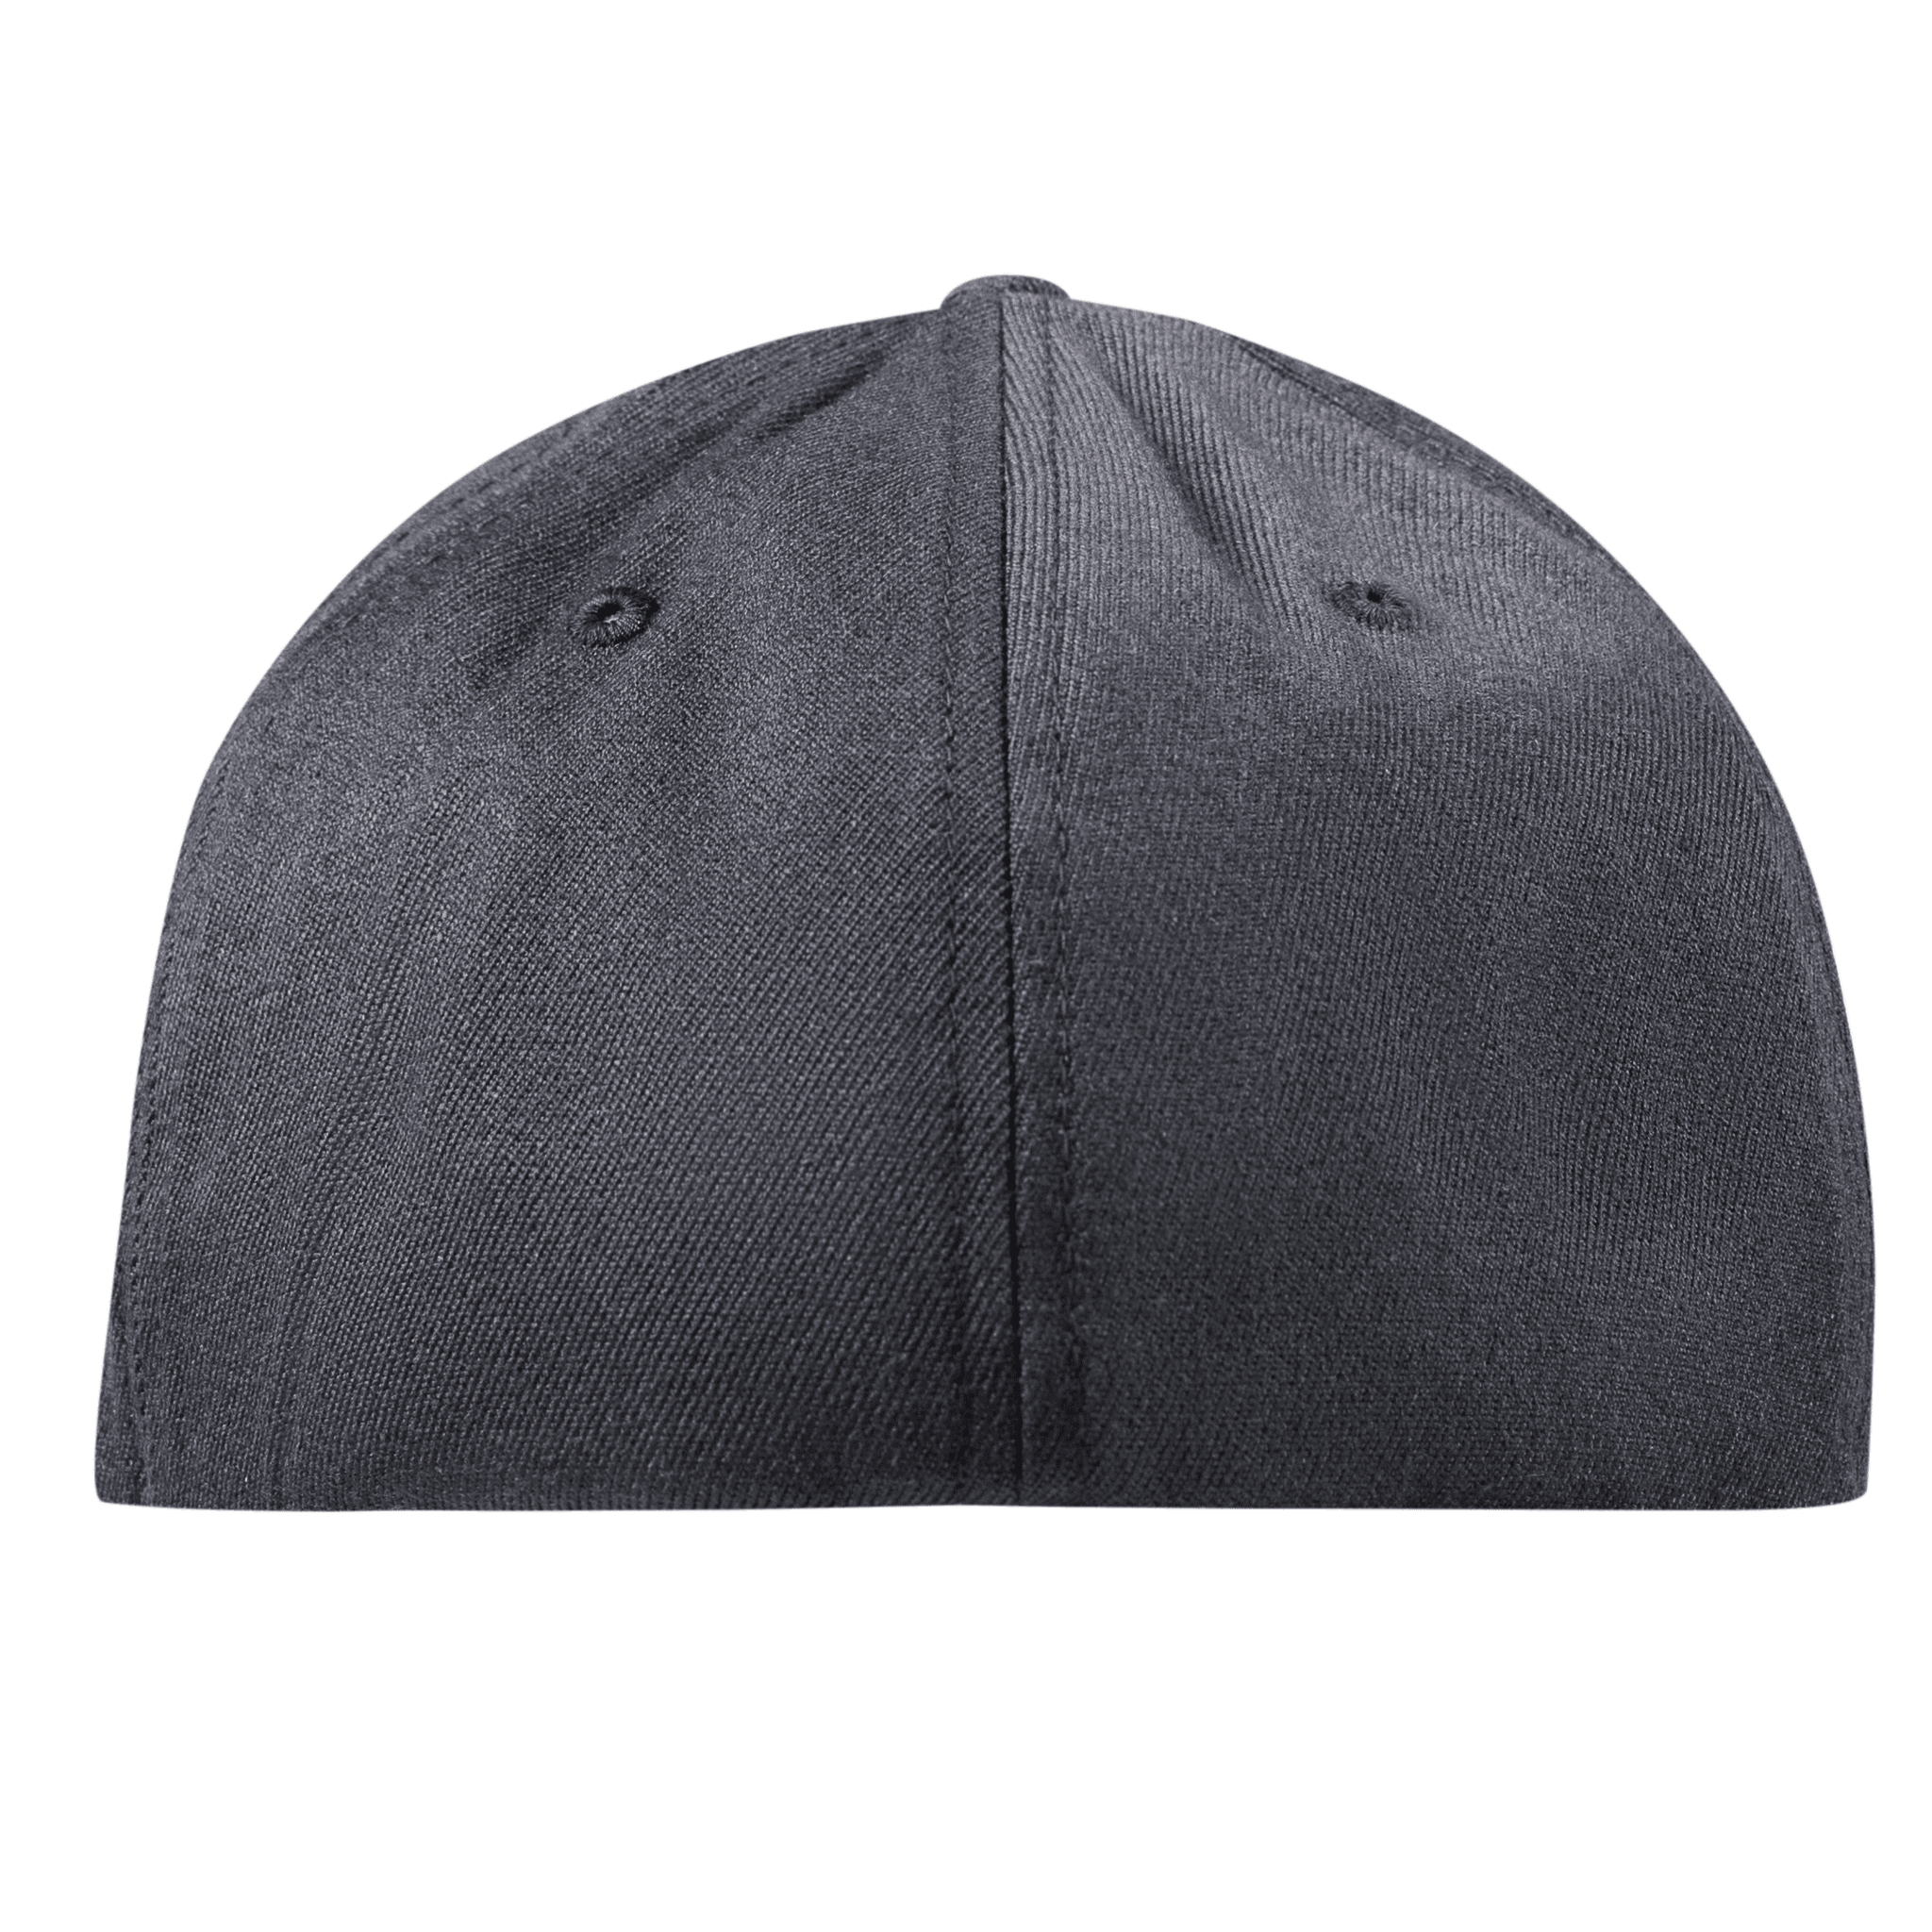 California Compass Flexfit Fitted Back Charcoal